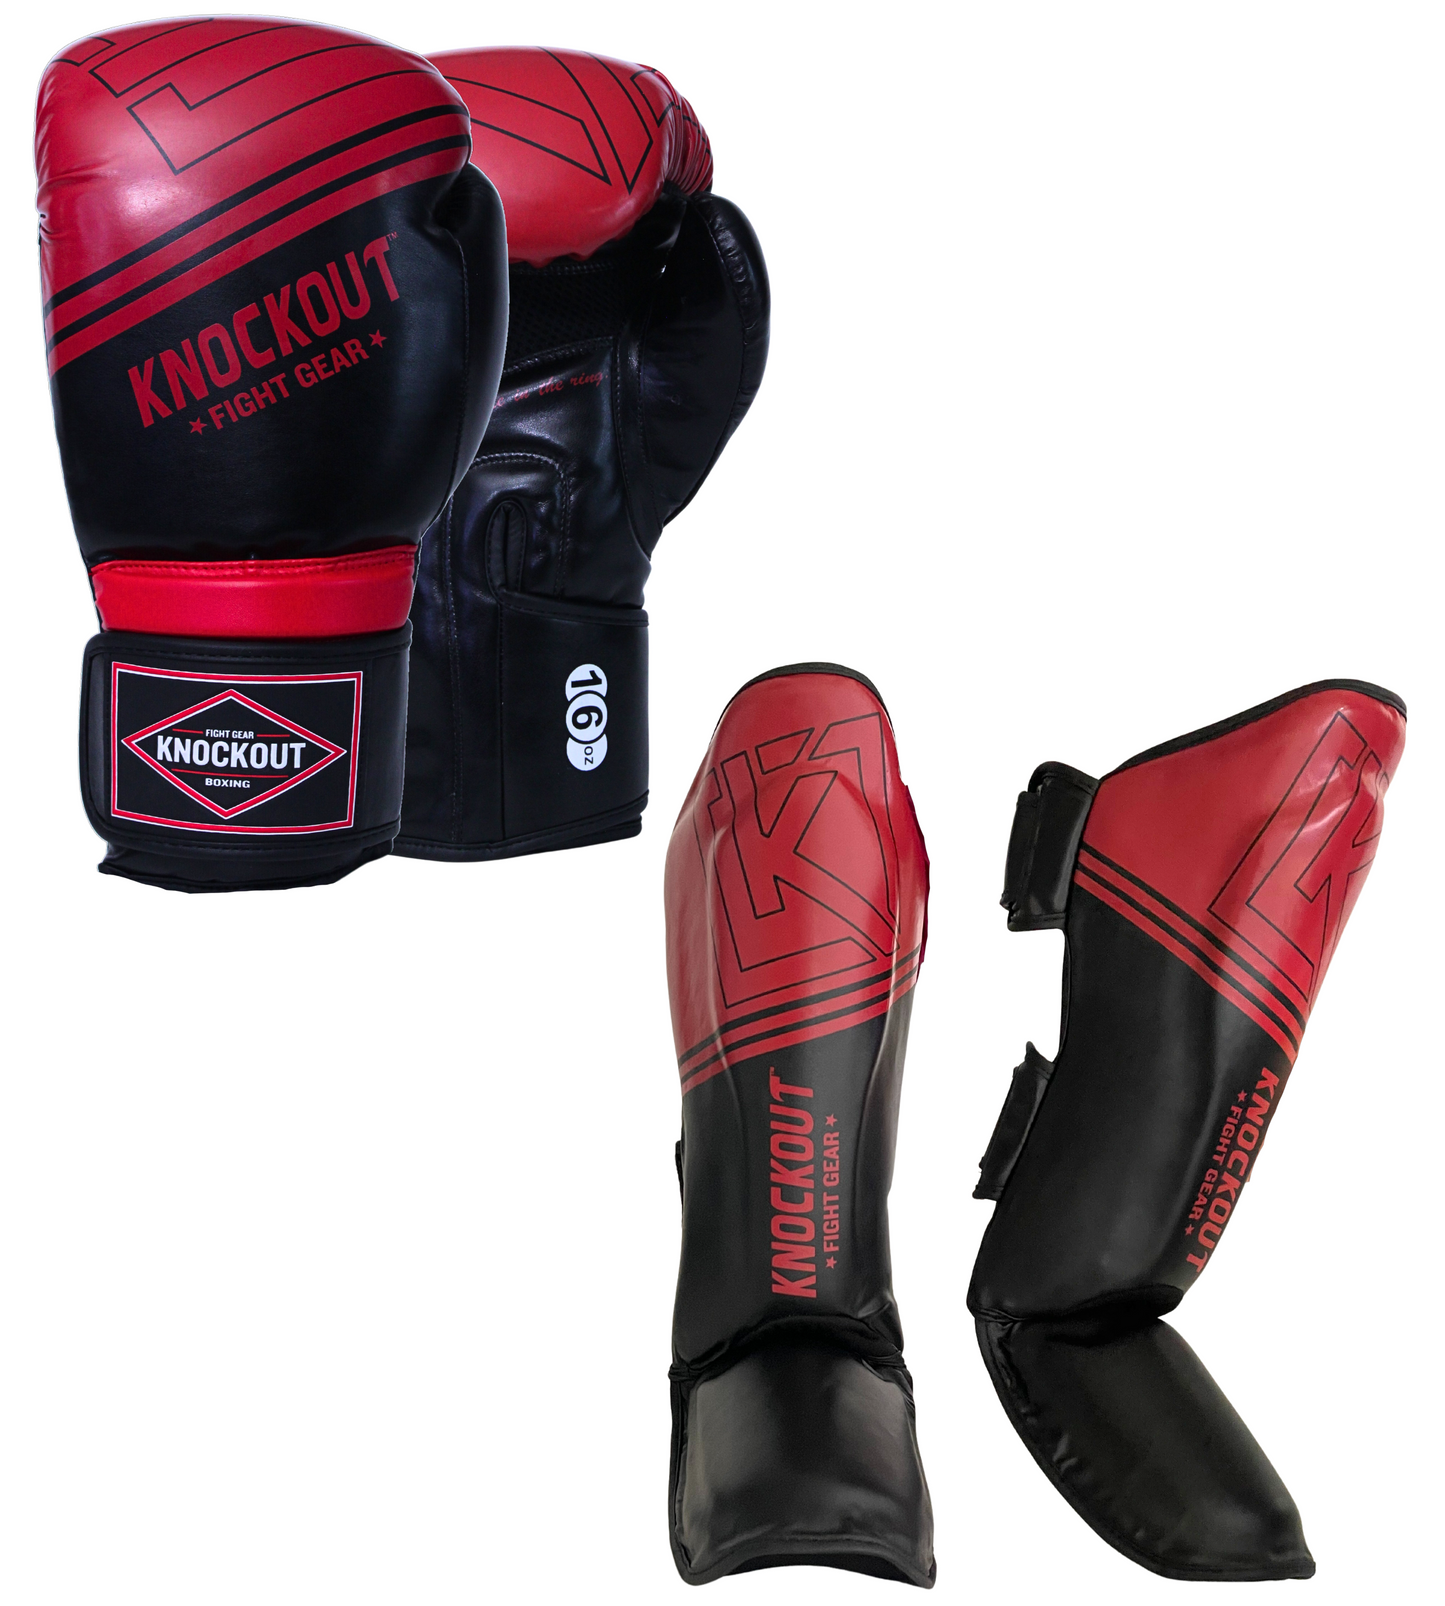 Boxing gloves and Muay Thai shin guards Complete Set, ideal for kickboxing, home gym training, and sparring, Best suited for MMA, featuring multi-layer padding and cushioning for enhanced protection